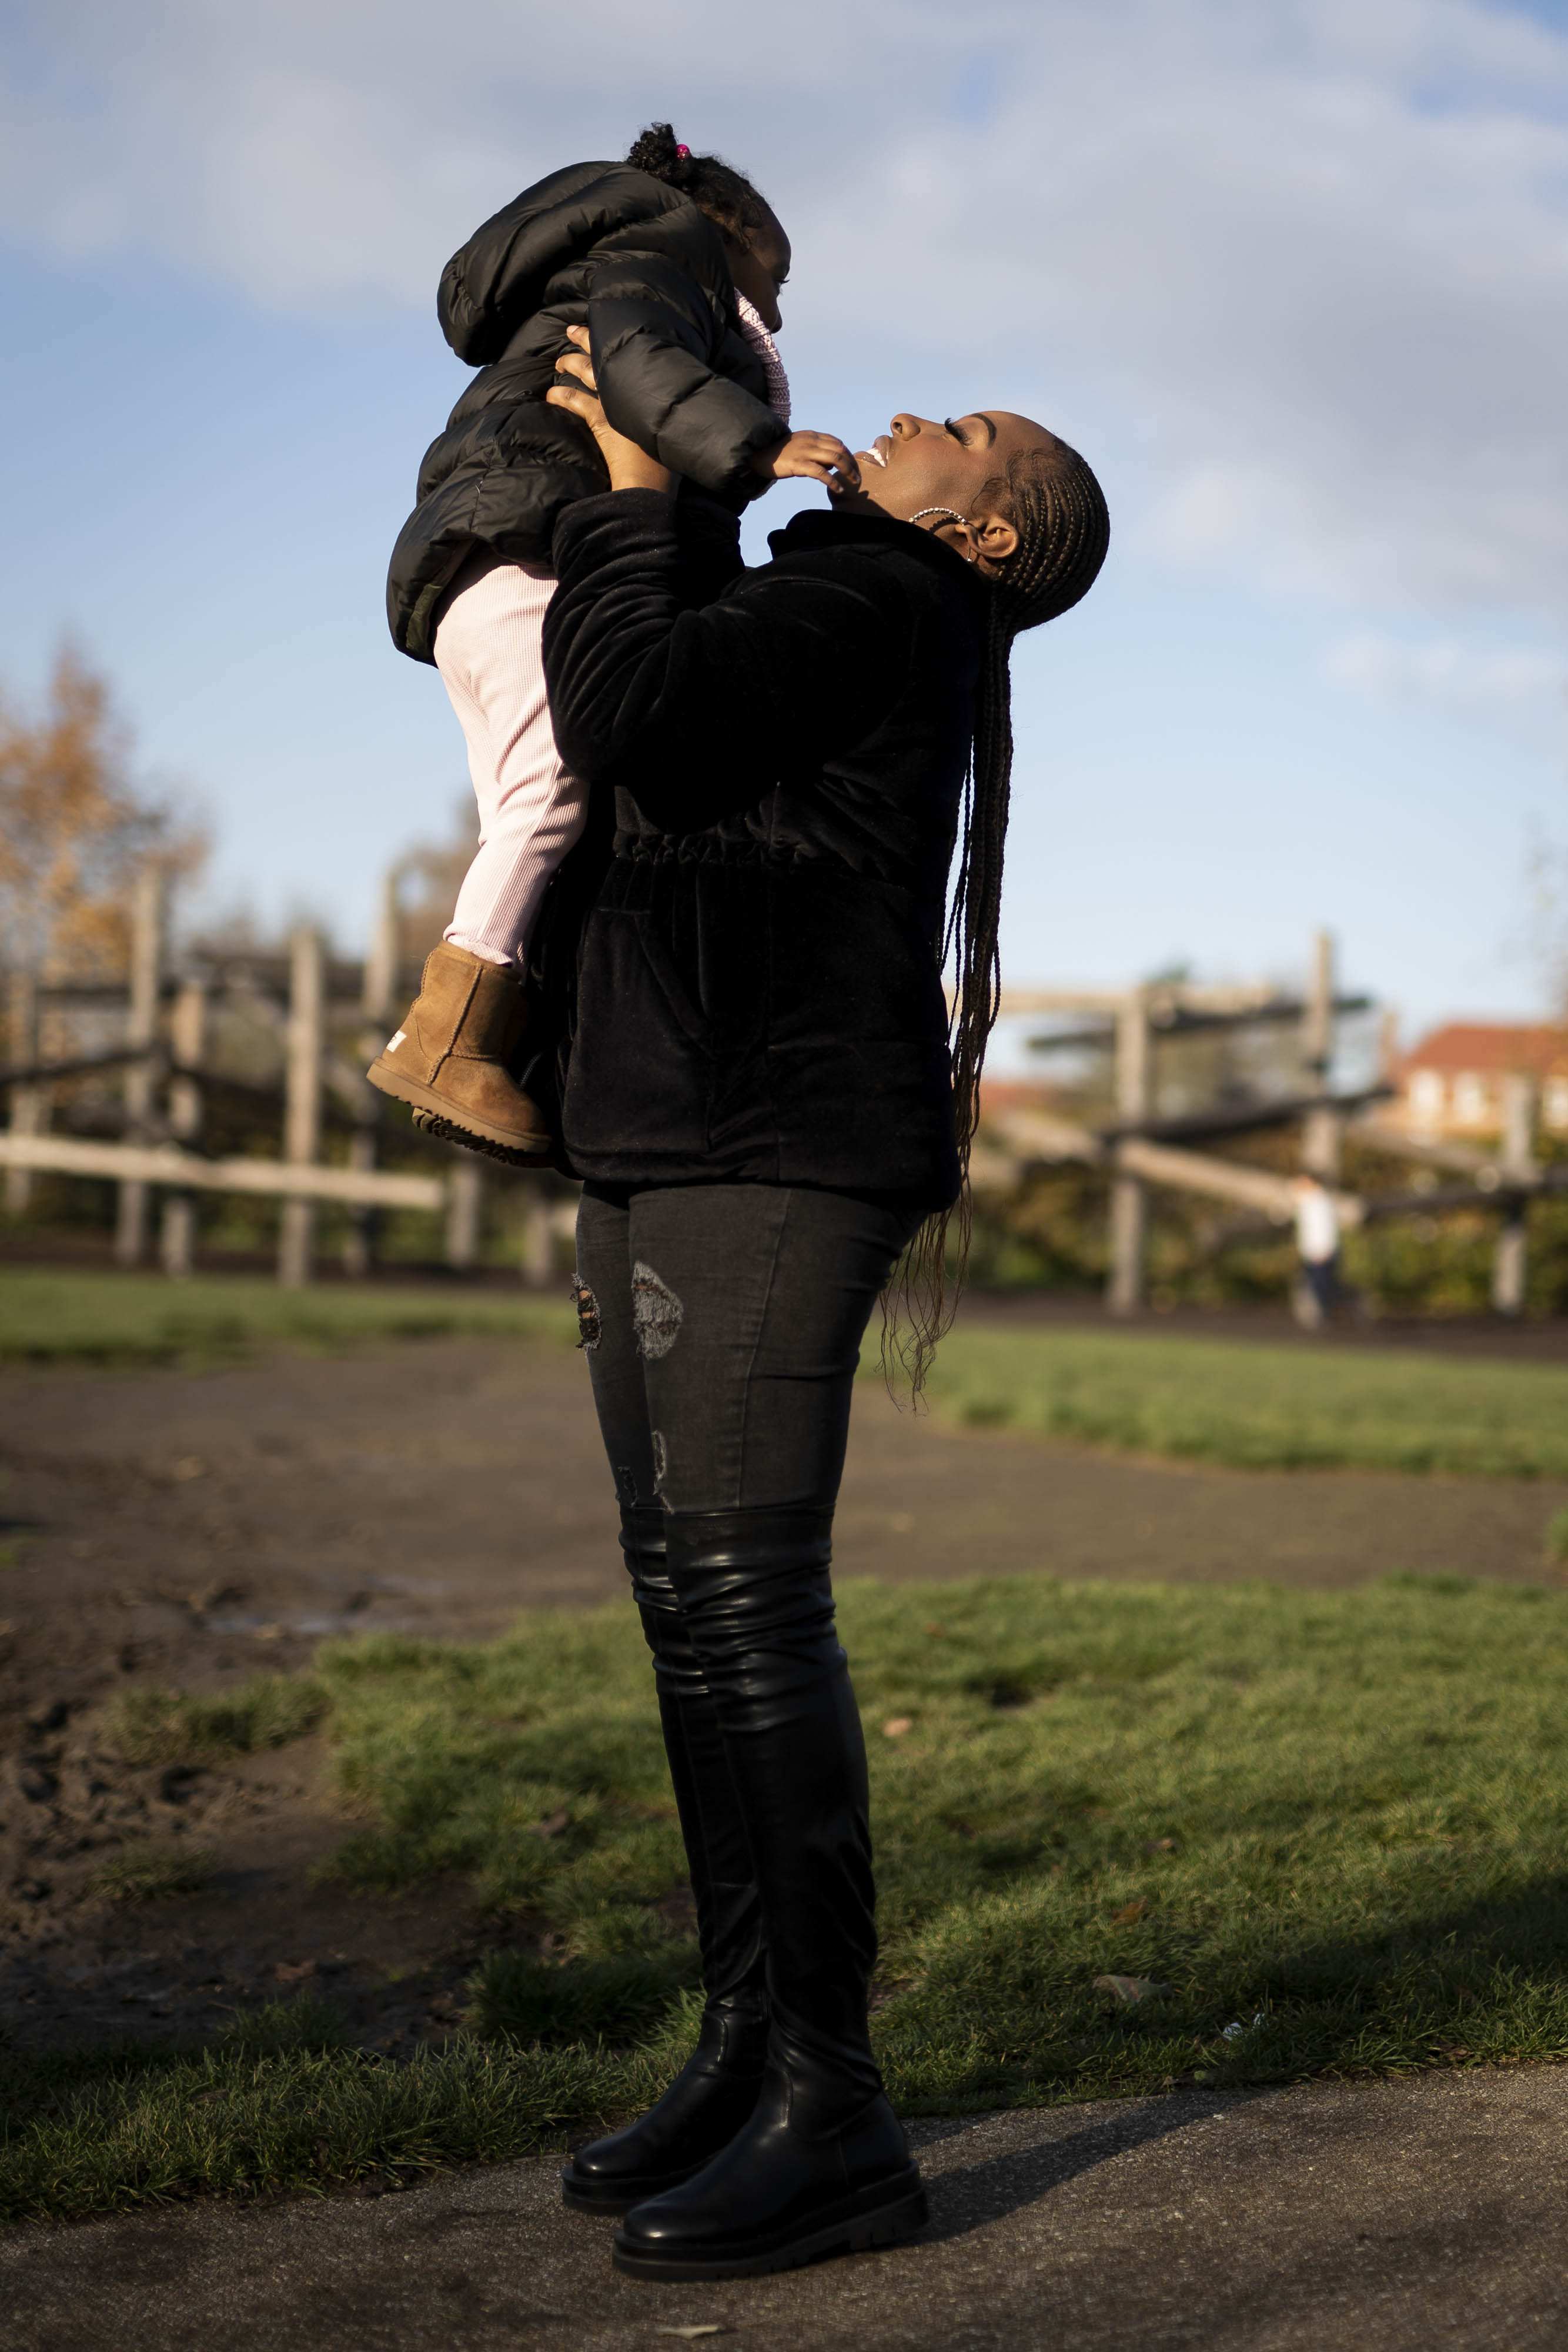 Naomi, 29, and her two year old daughter are pictured as part of the Centre for Homelessness Impact’s online image library of people experiencing homelessness (Aaron Chown/PA Wire/Centre for Homelessness Impact)